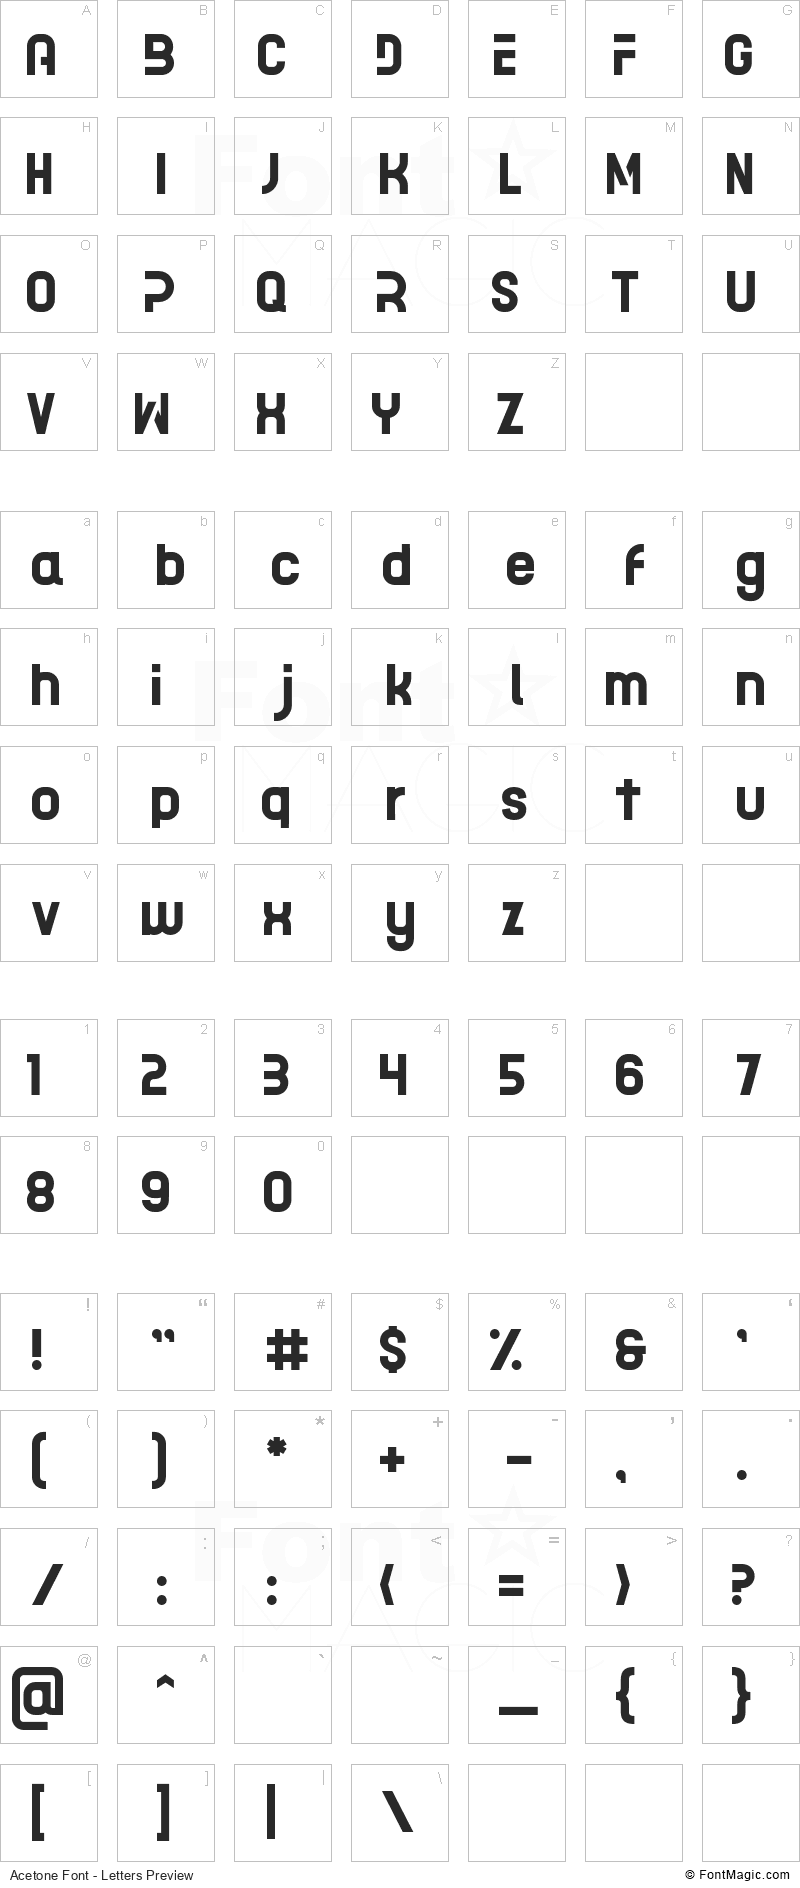 Acetone Font - All Latters Preview Chart